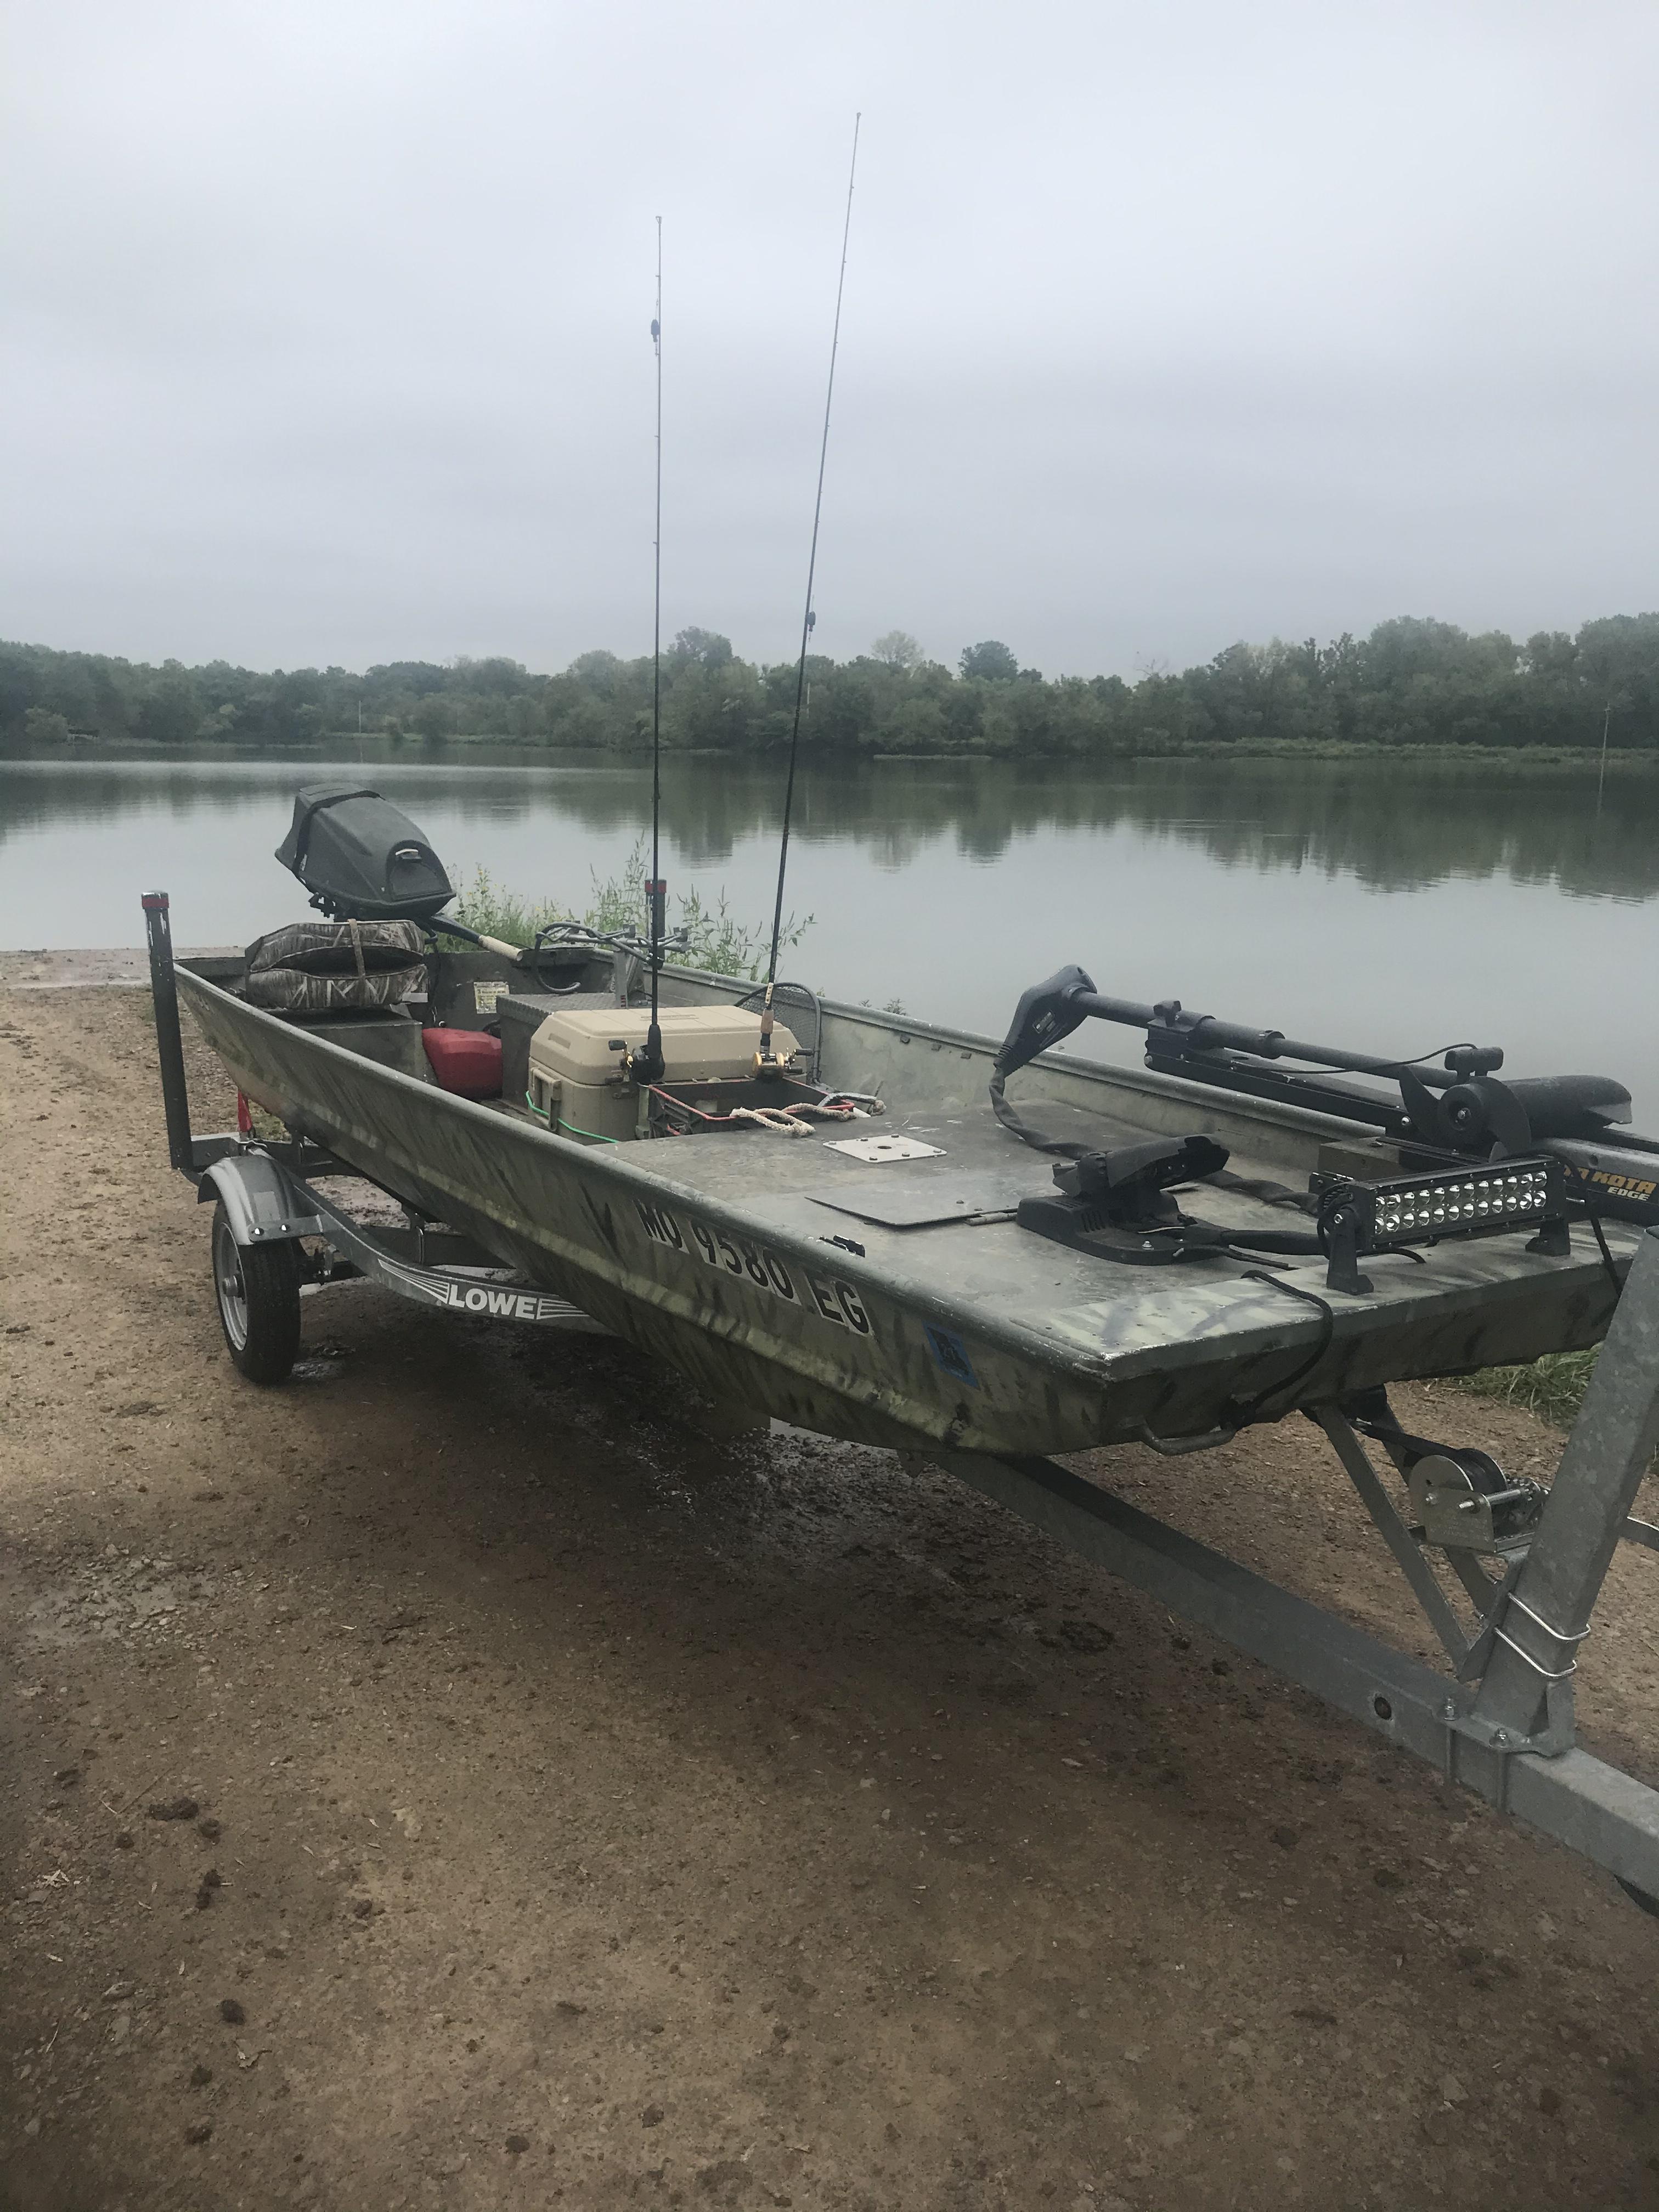 Catfish rod holders - Tips & Tricks, Boat Help and Product Review